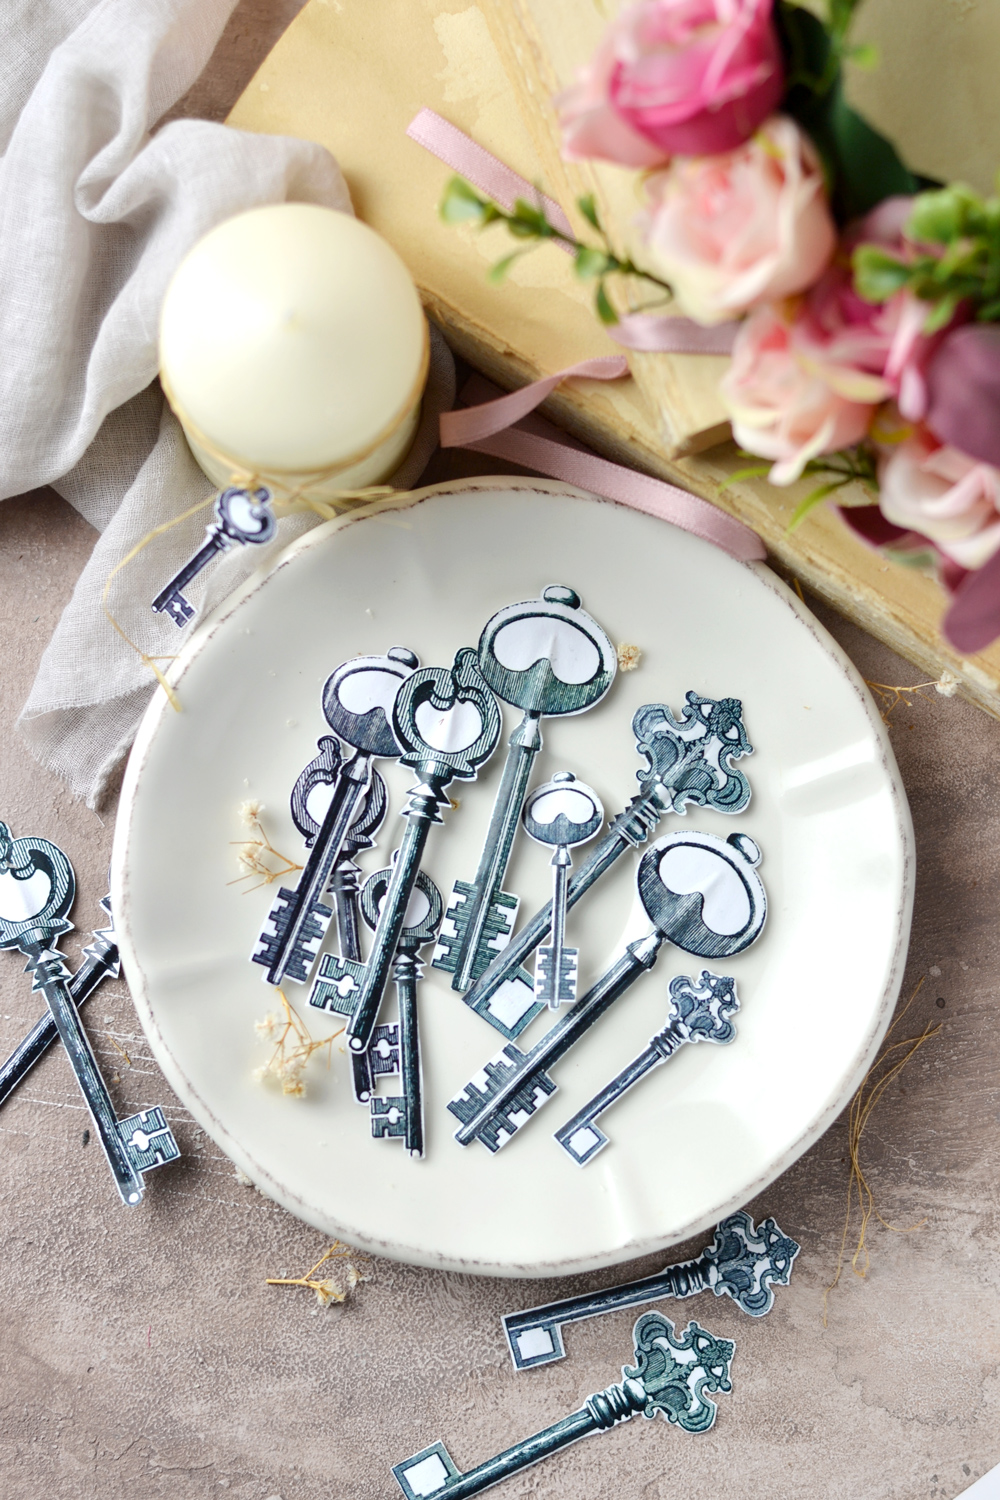 A plate with keys on them